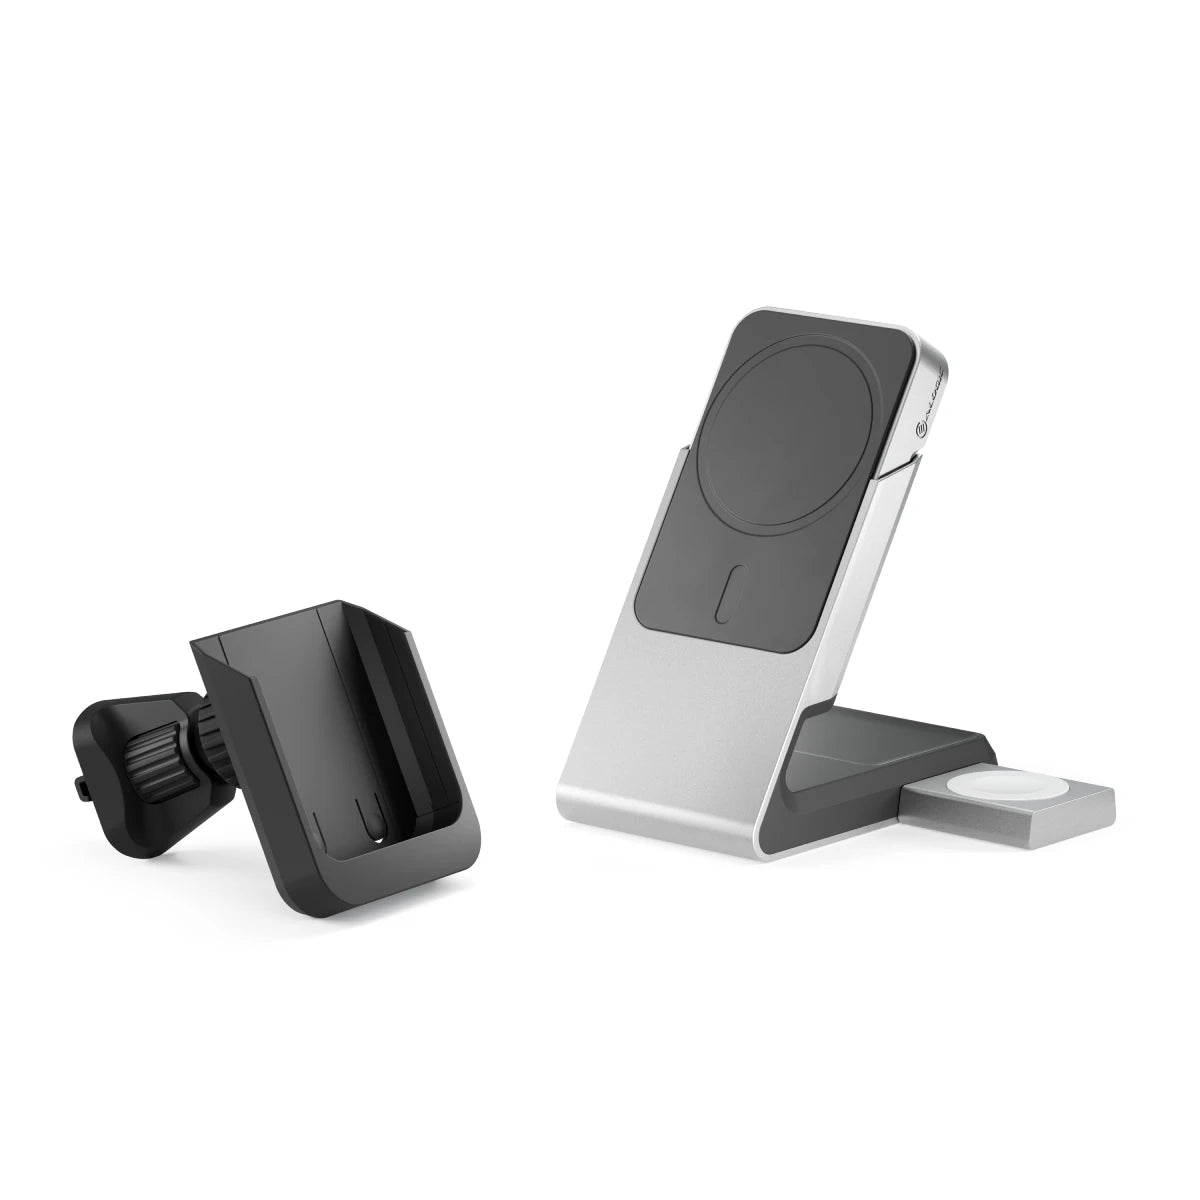 Matrix+ Flow 3-in-1 Dock, Power Bank and Car Charger